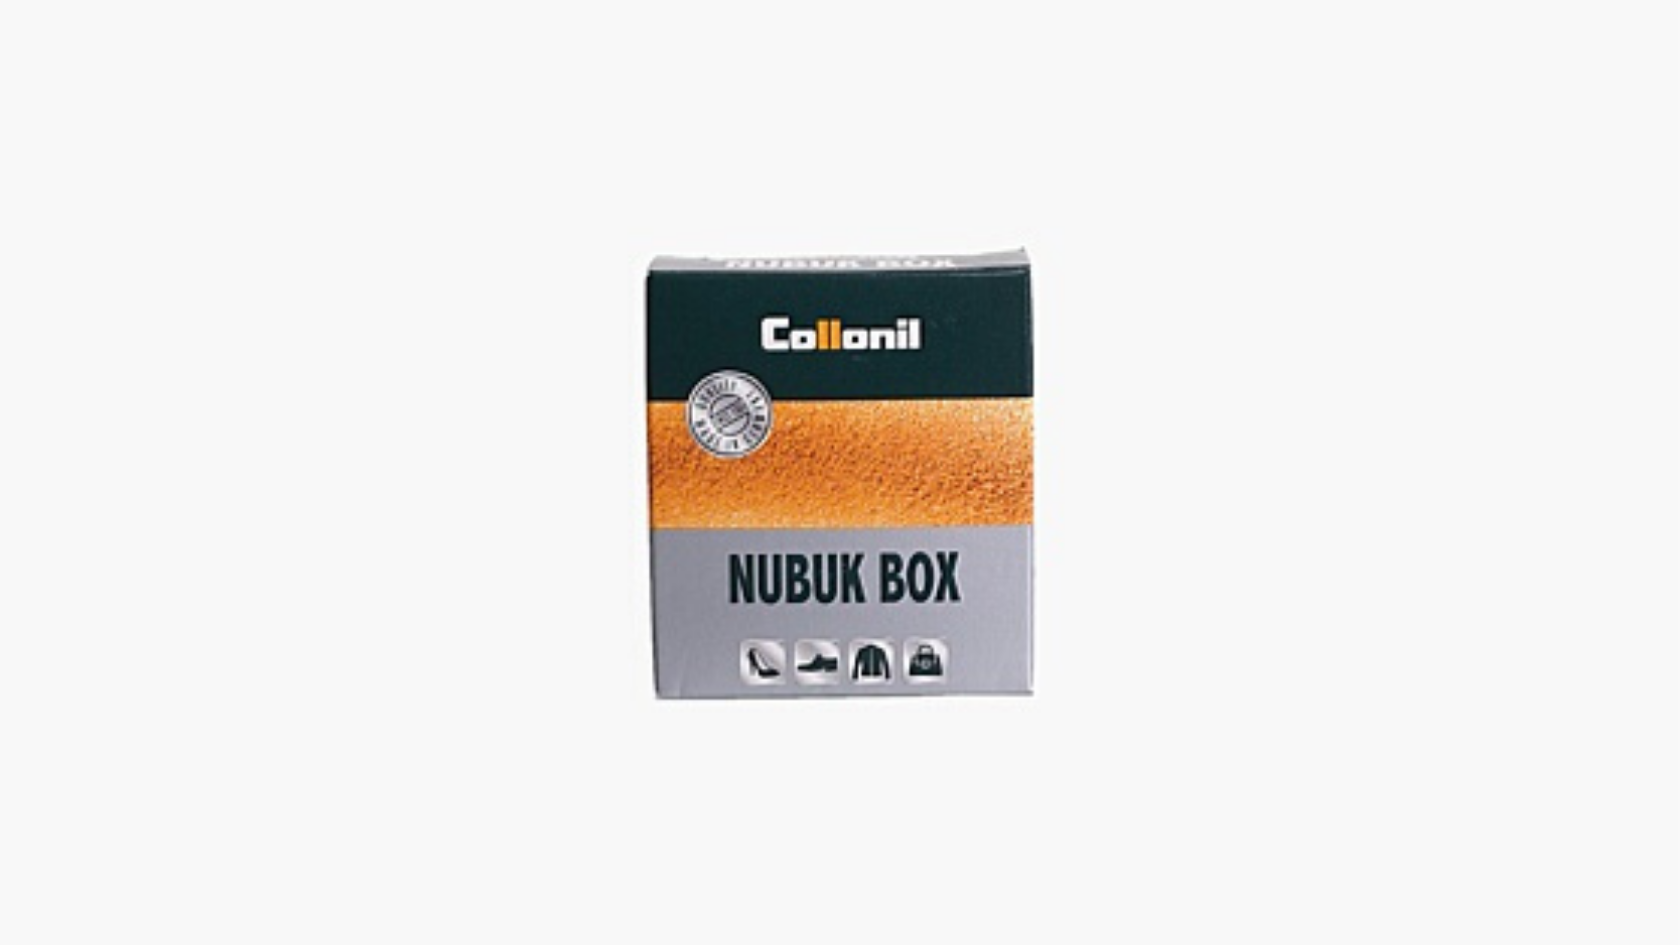 Image of Collonil’s Nubuk Box against a neutral grey background. 